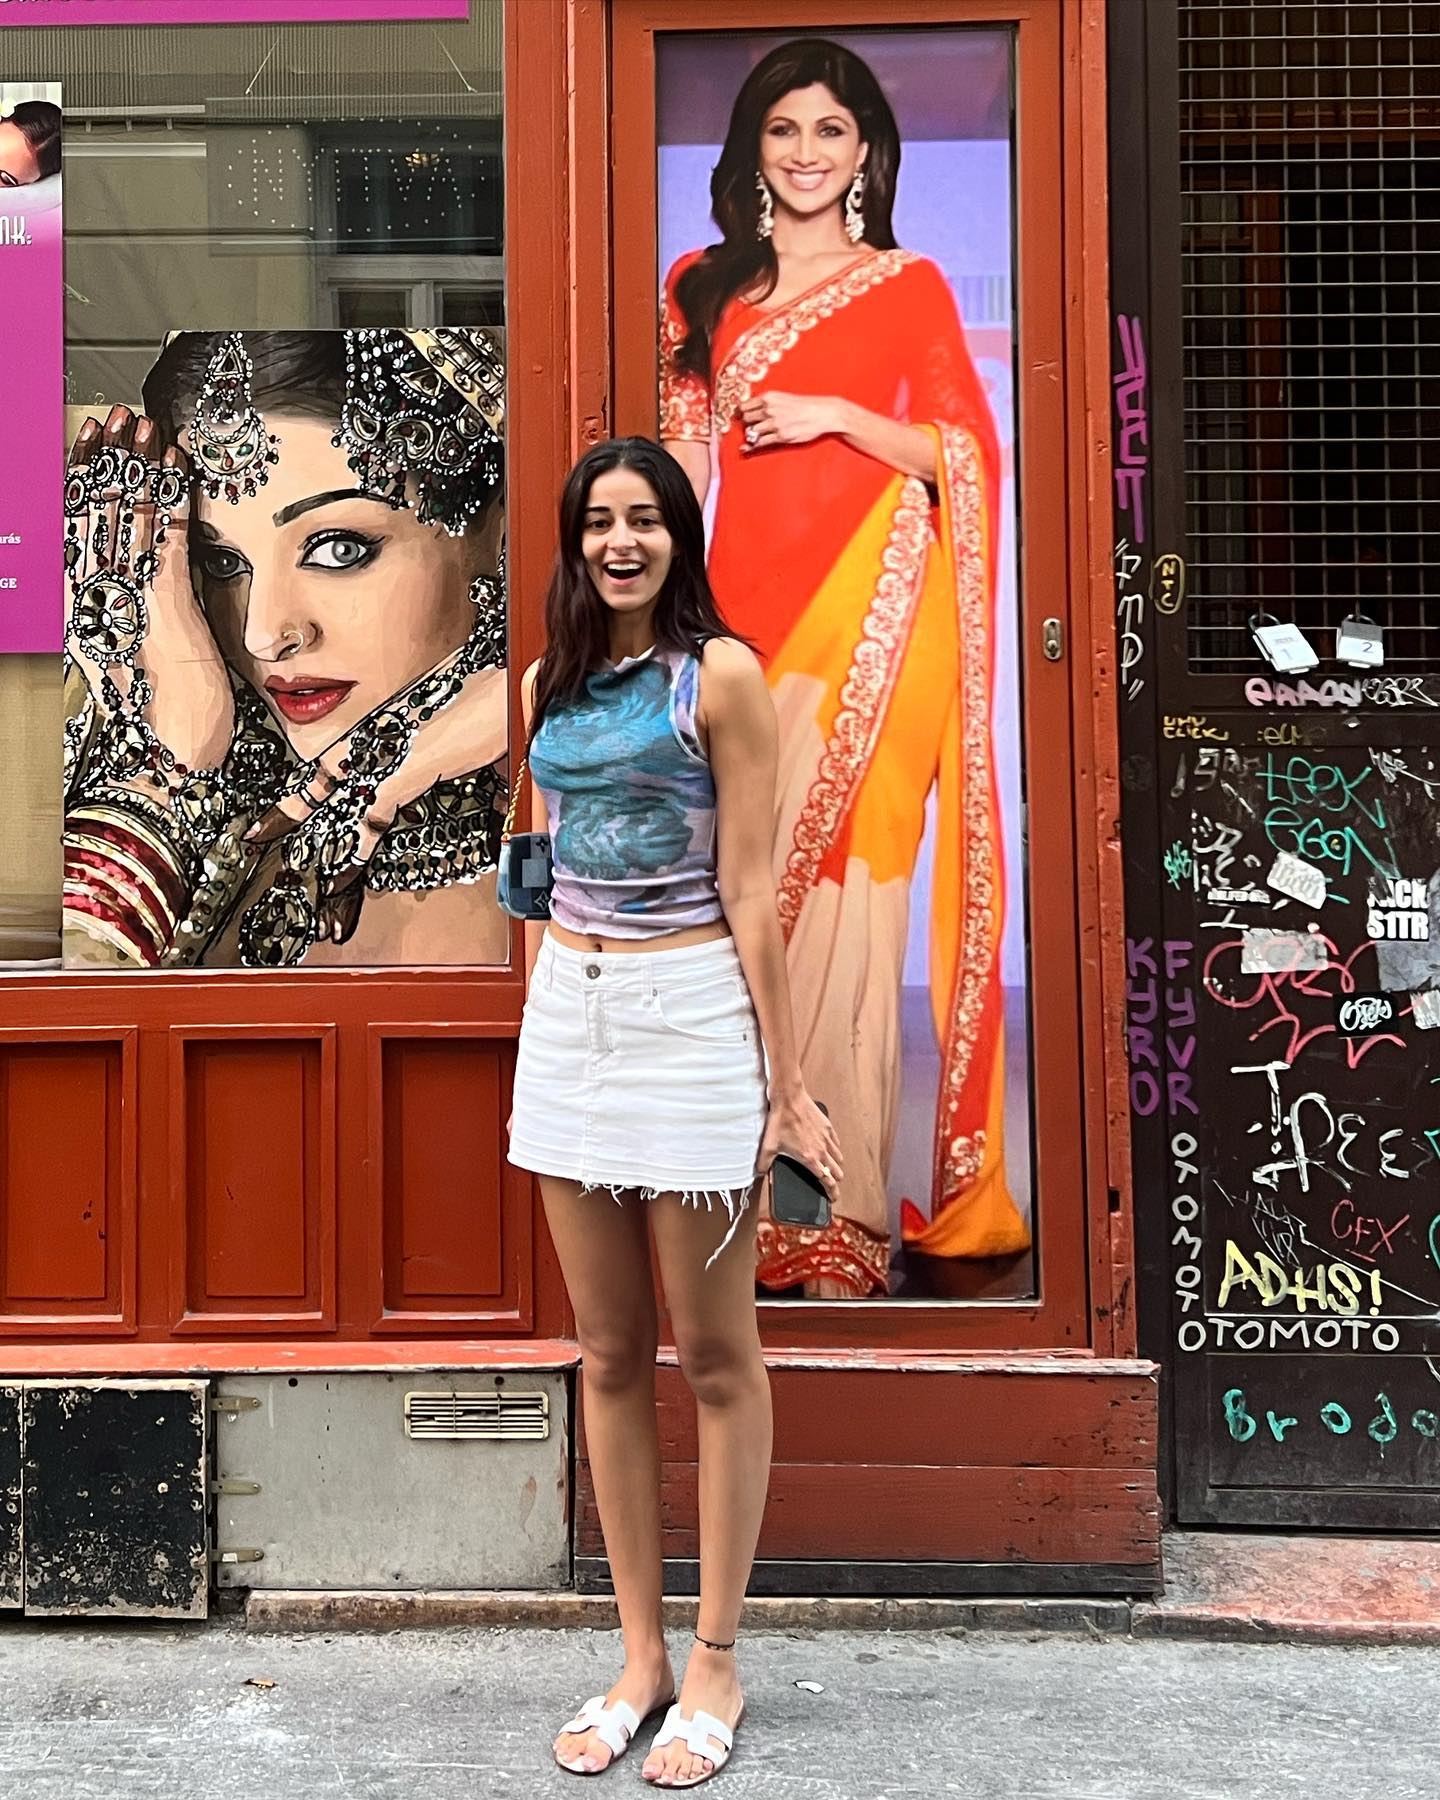 Ananya Panday is all smiles as she poses amid the posters of Shilpa Shetty and Aishwarya Rai Bachchan in Budapest